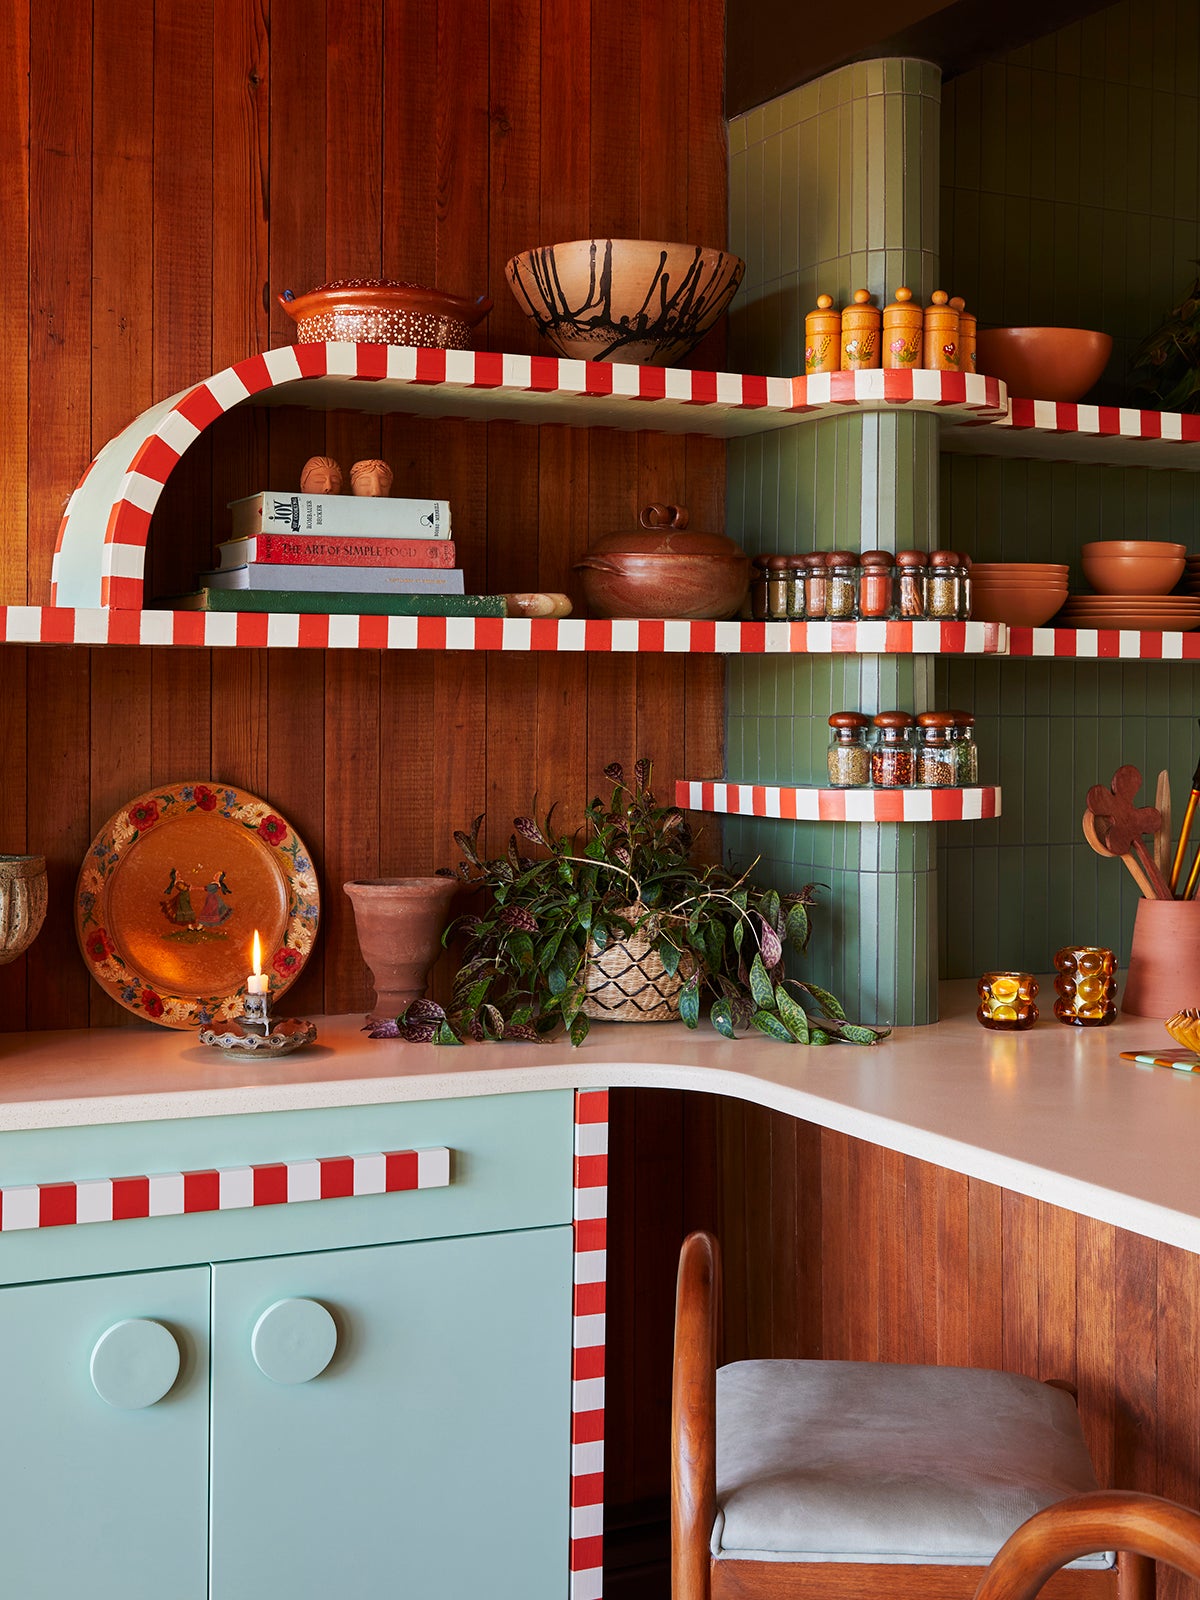 Kitchen shelving with wood-paneled walls and candy striped open shelving